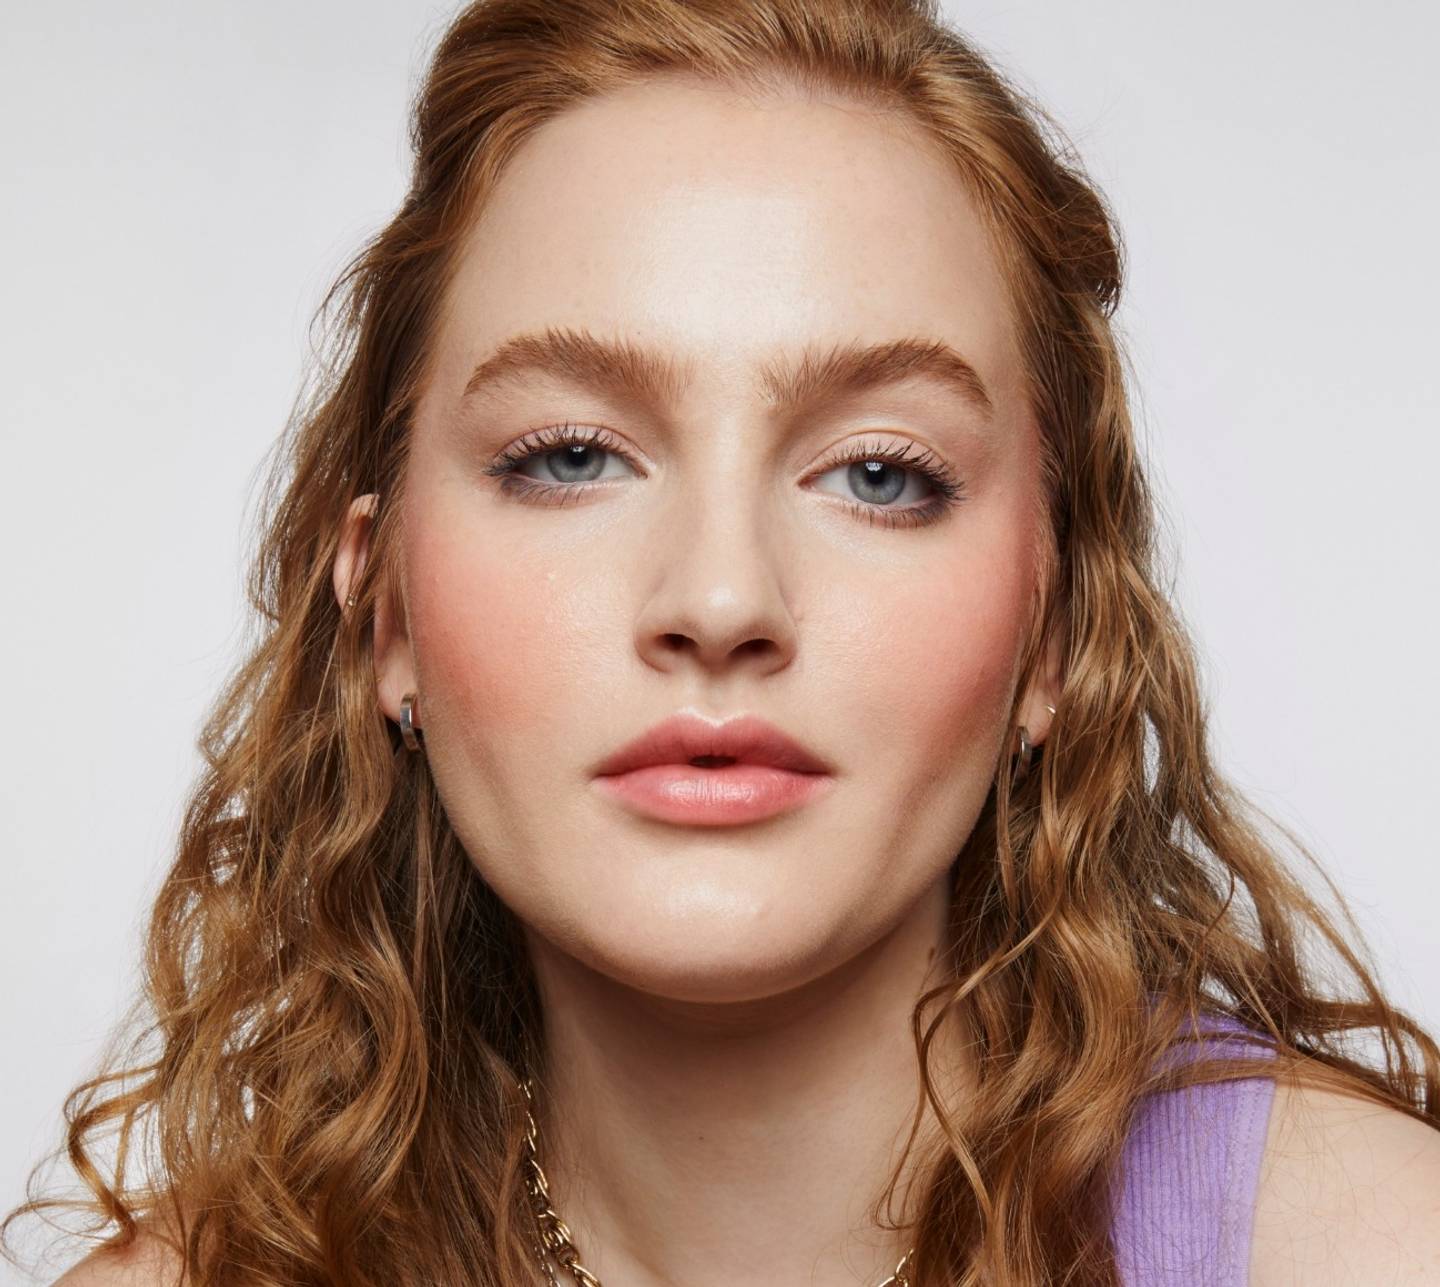 Model with wavy strawberry blonde hair wears a full face of Milk Makeup products on a white background